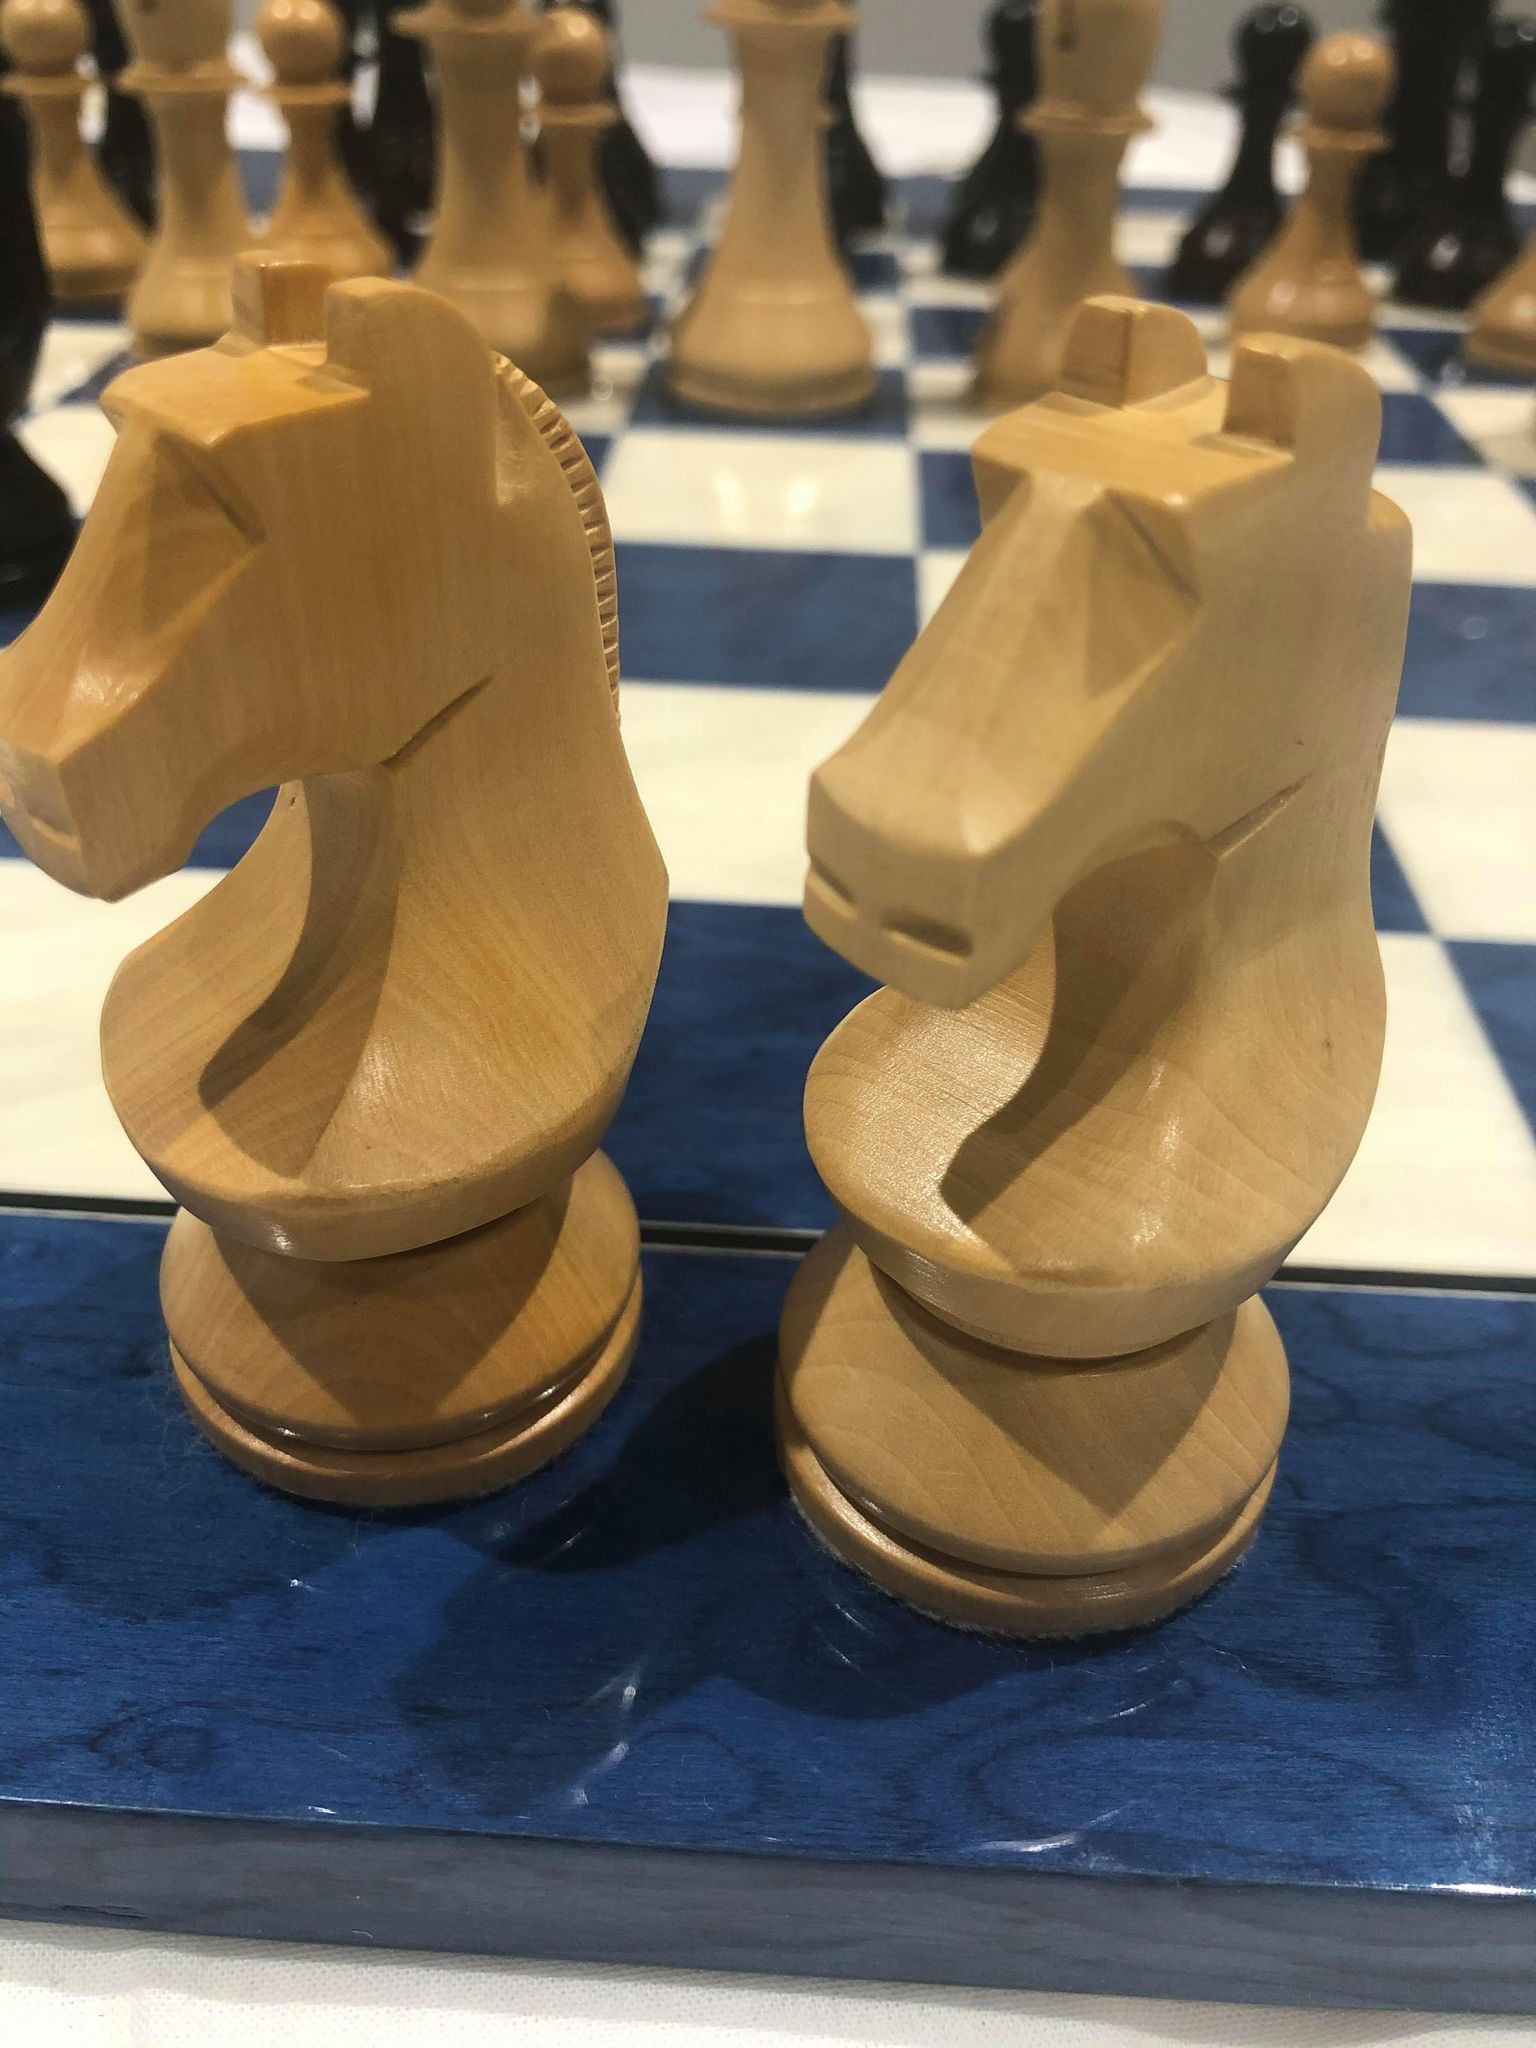 Official FIDE chess set